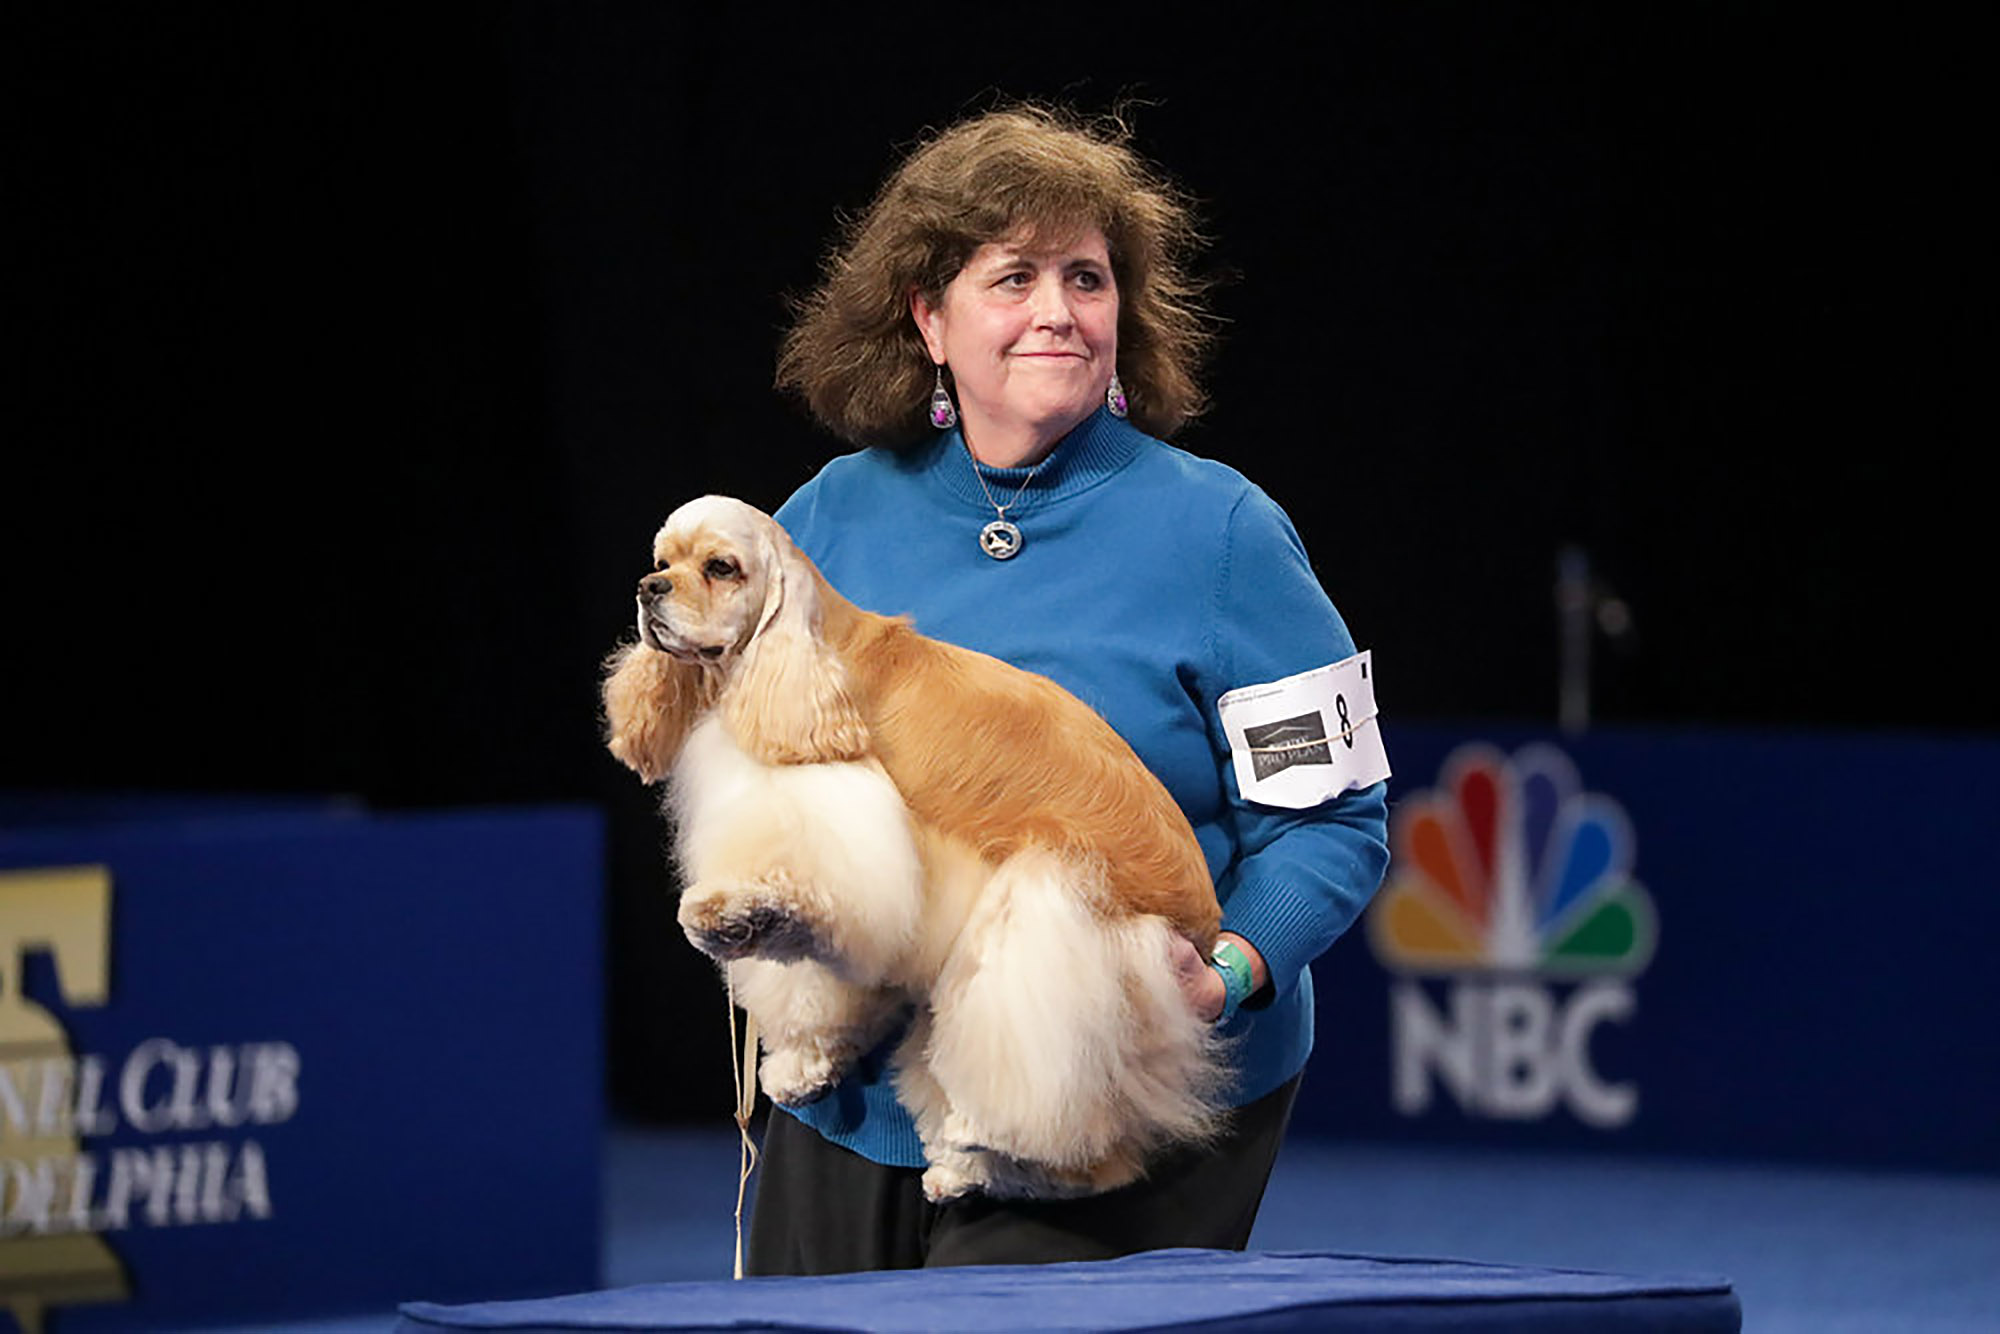 The ASCOB Cocker Spaniel held by its owner.